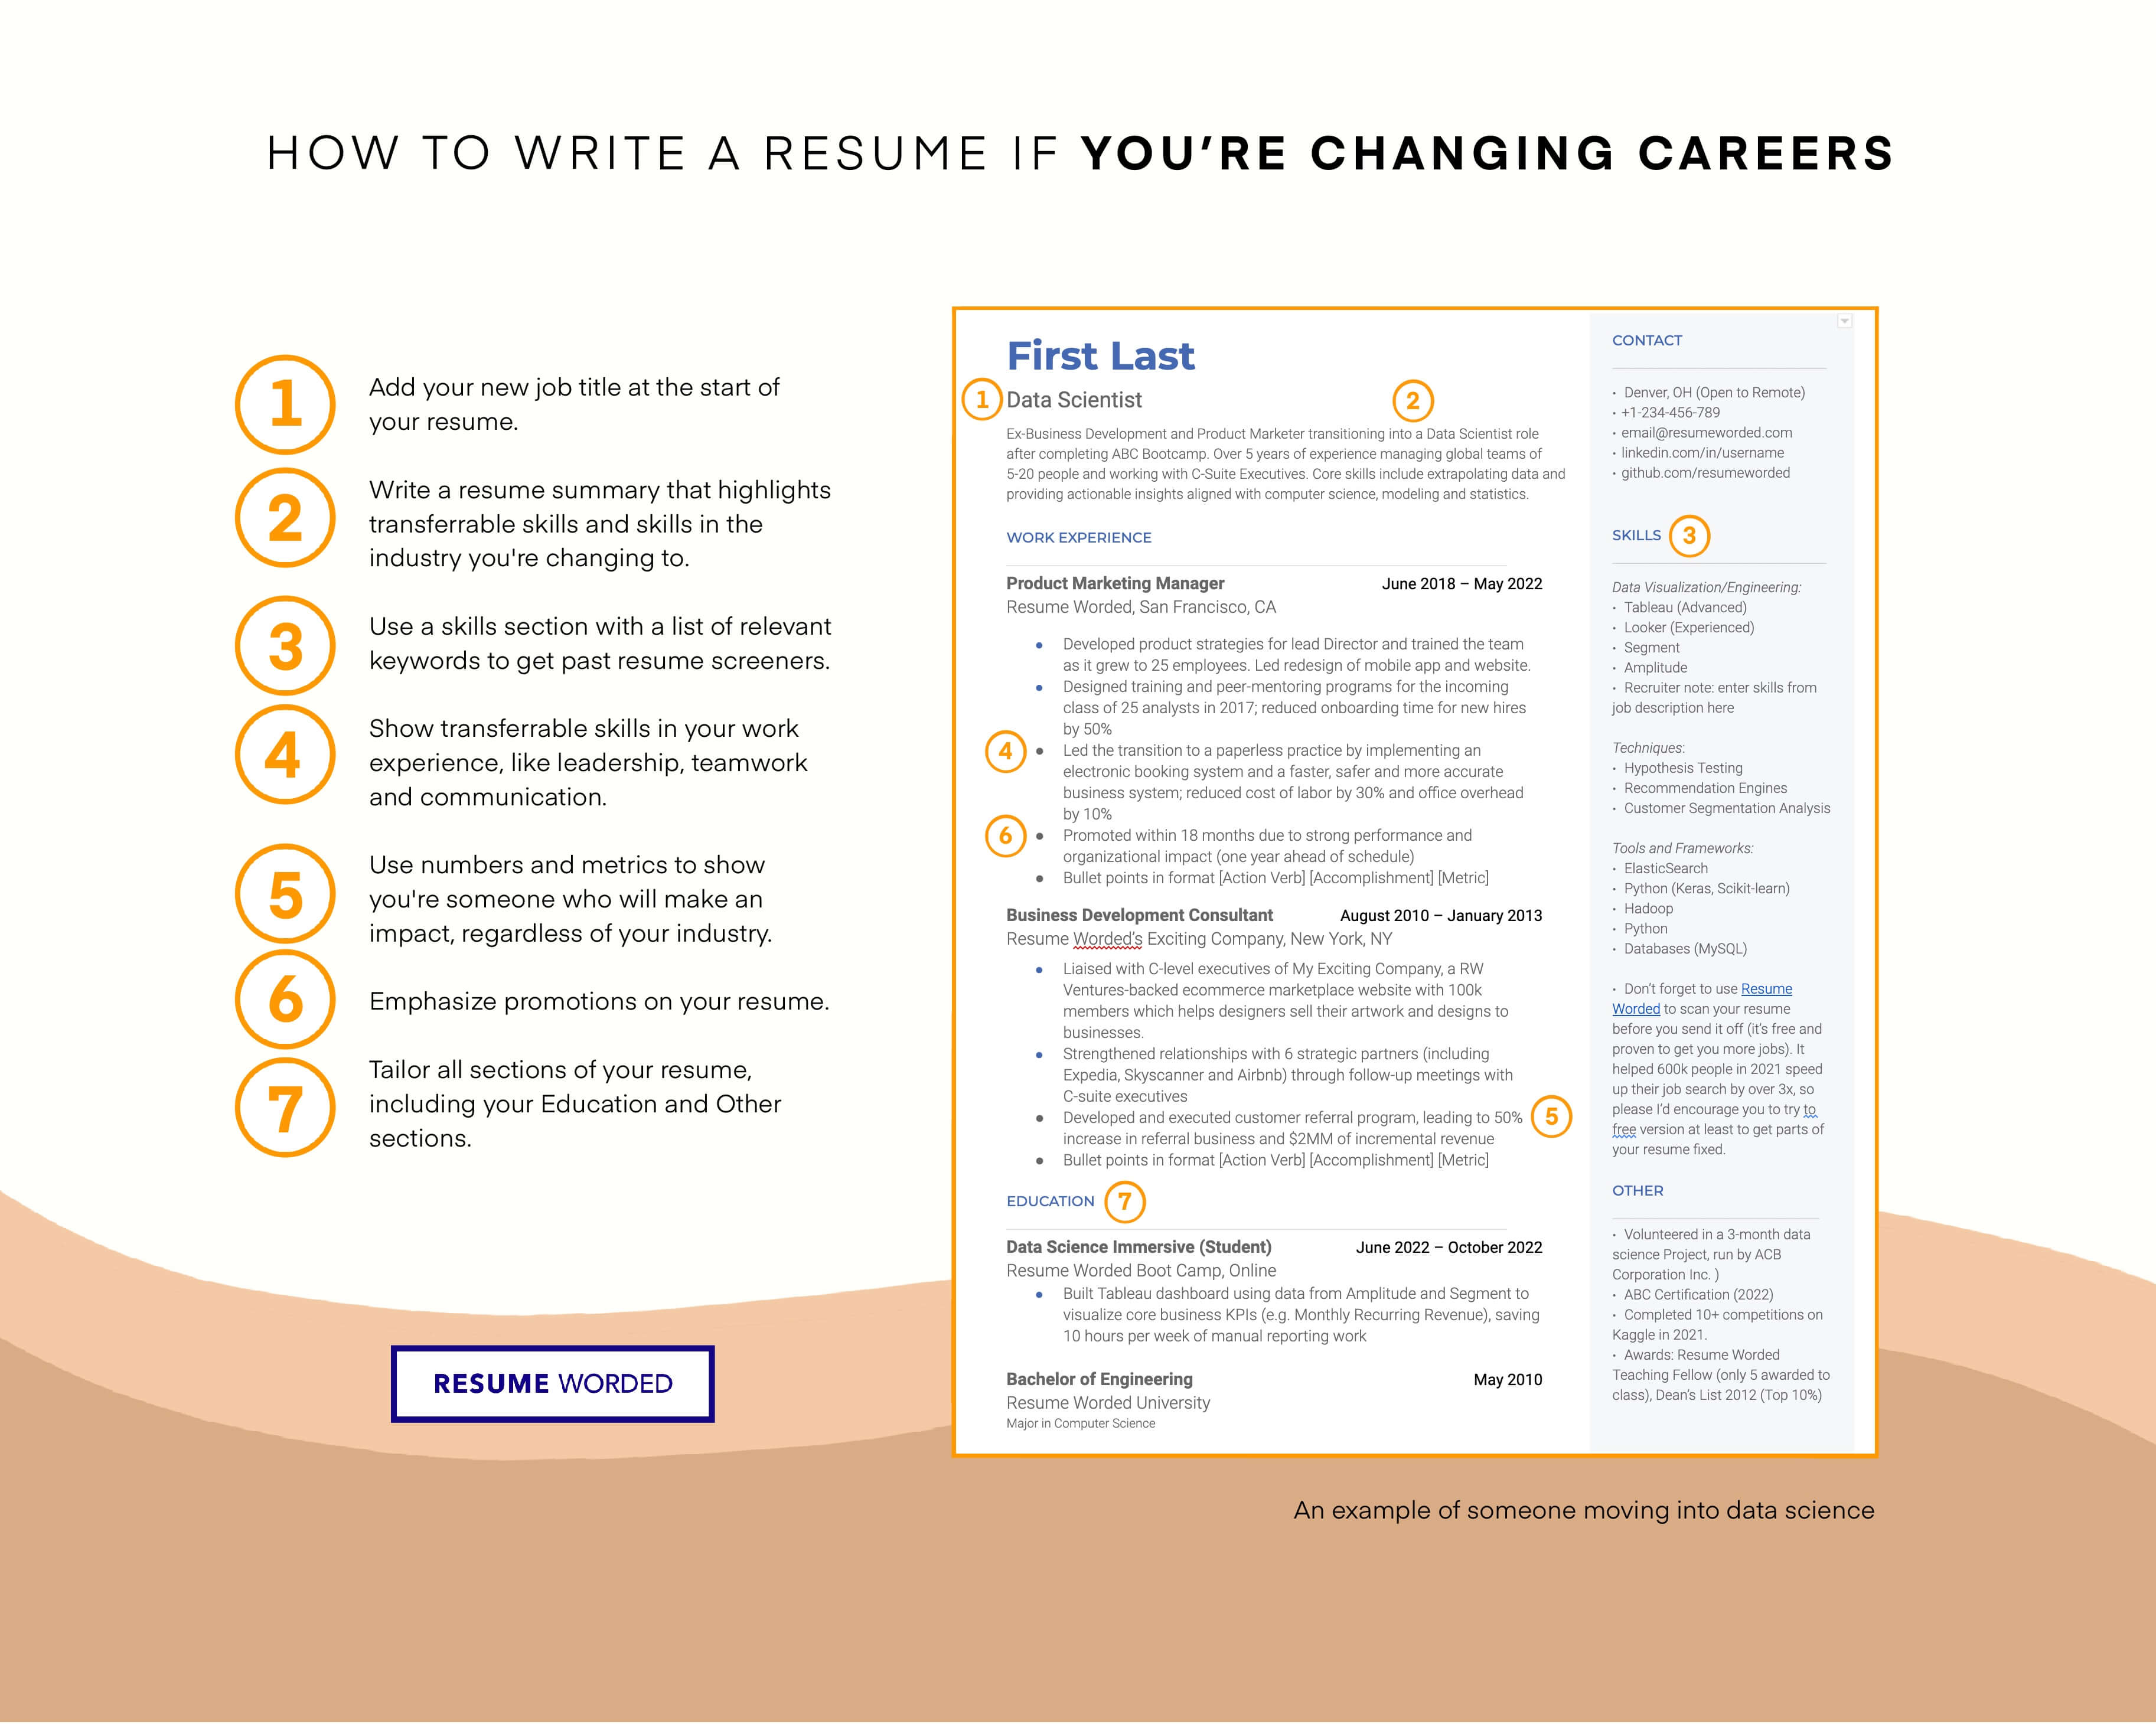 This template is great for professionals or career changers. A summary is useful on your resume if you are changing careers or want to cover skills that aren't in your Experience section. The Skills section is prioritized to highlight any keywords/skills.